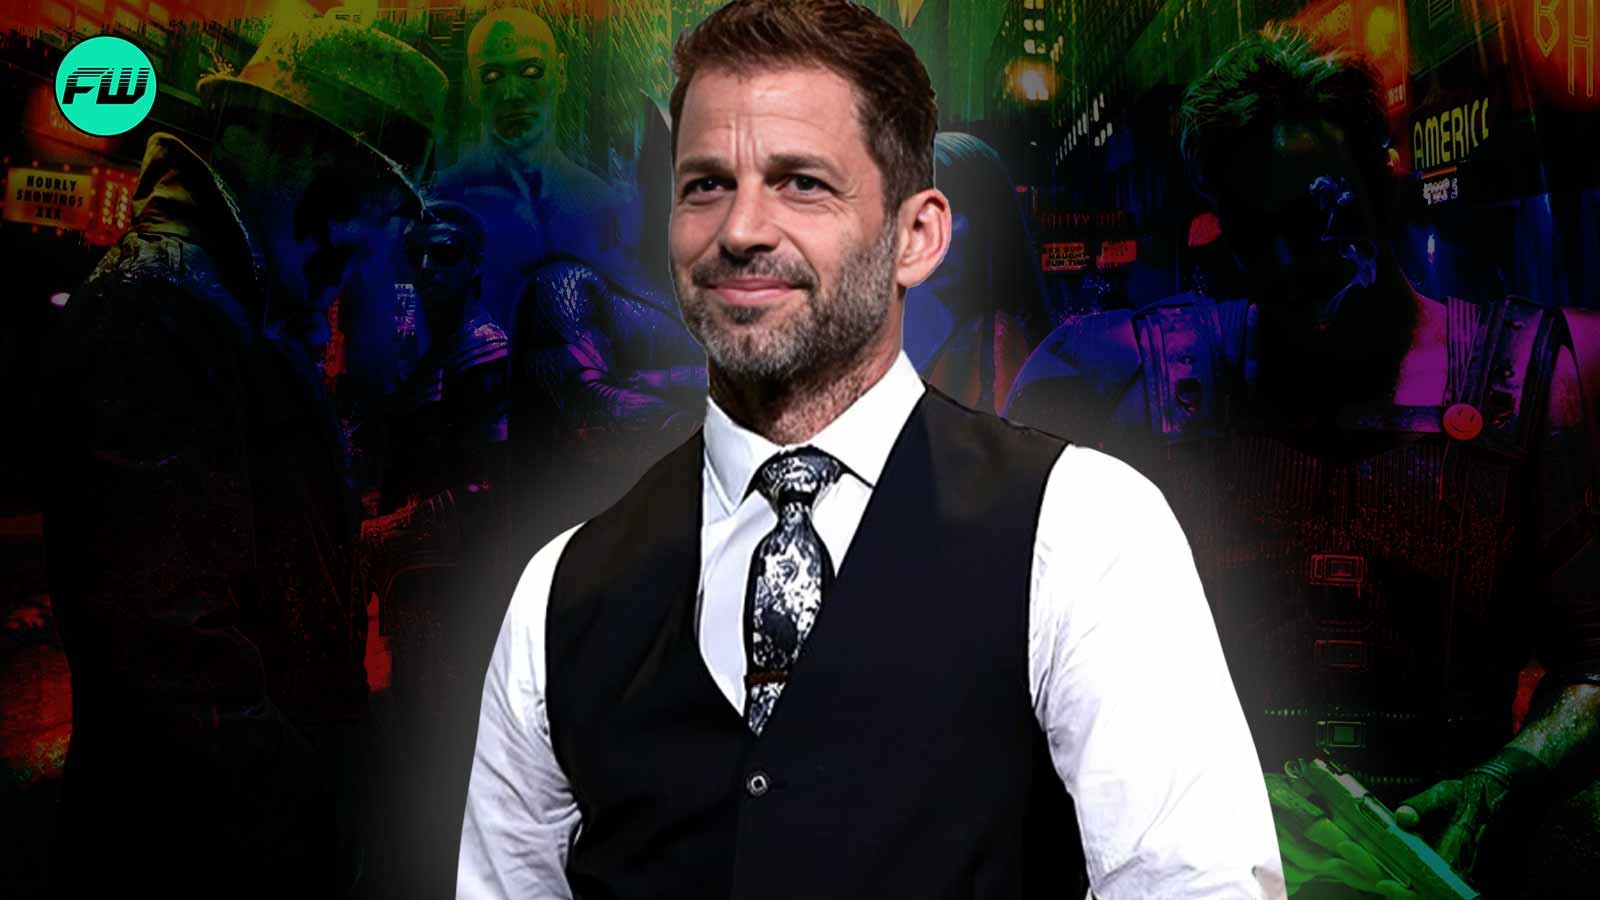 The comic book movie that Zack Snyder made because he knows superheroes are “incestuous and crazy”